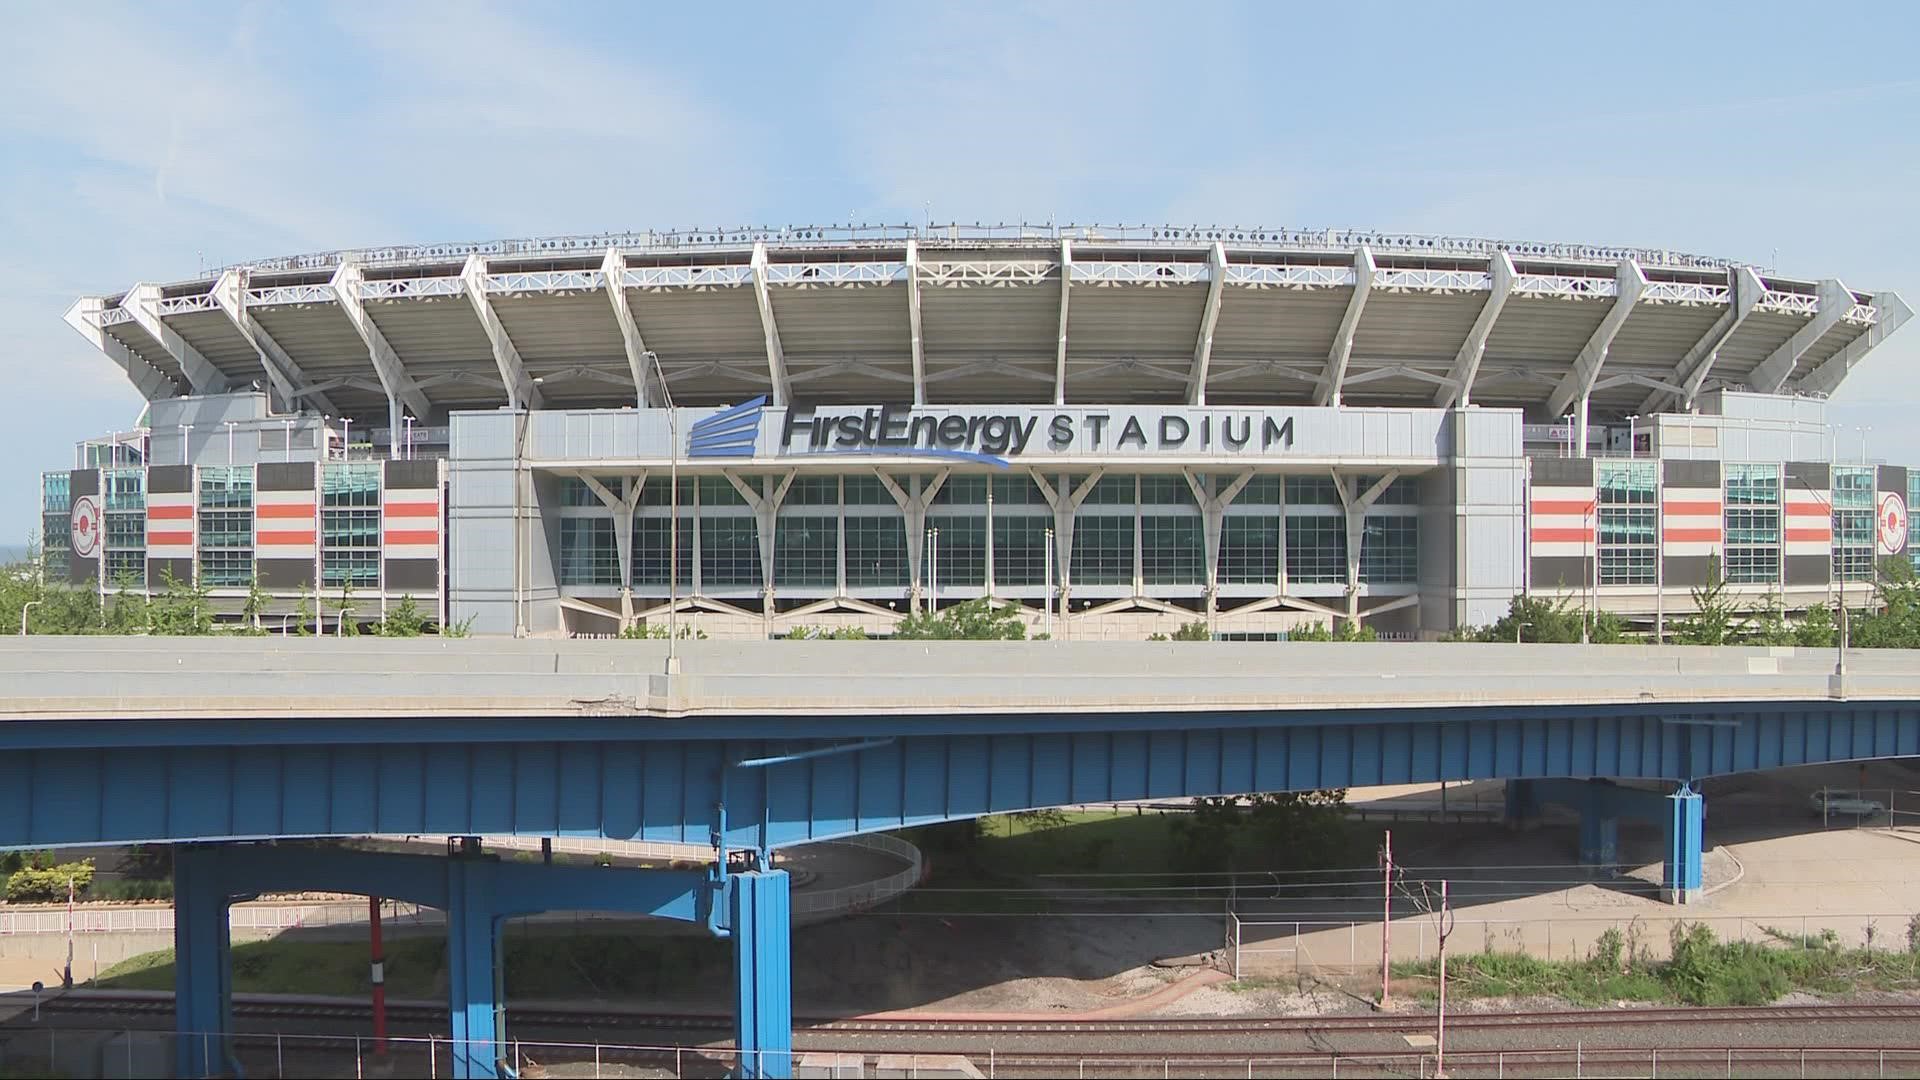 Council voted 16-1 on the resolution calling for FirstEnergy to relinquish the naming rights to the stadium that is the home of the Cleveland Browns.